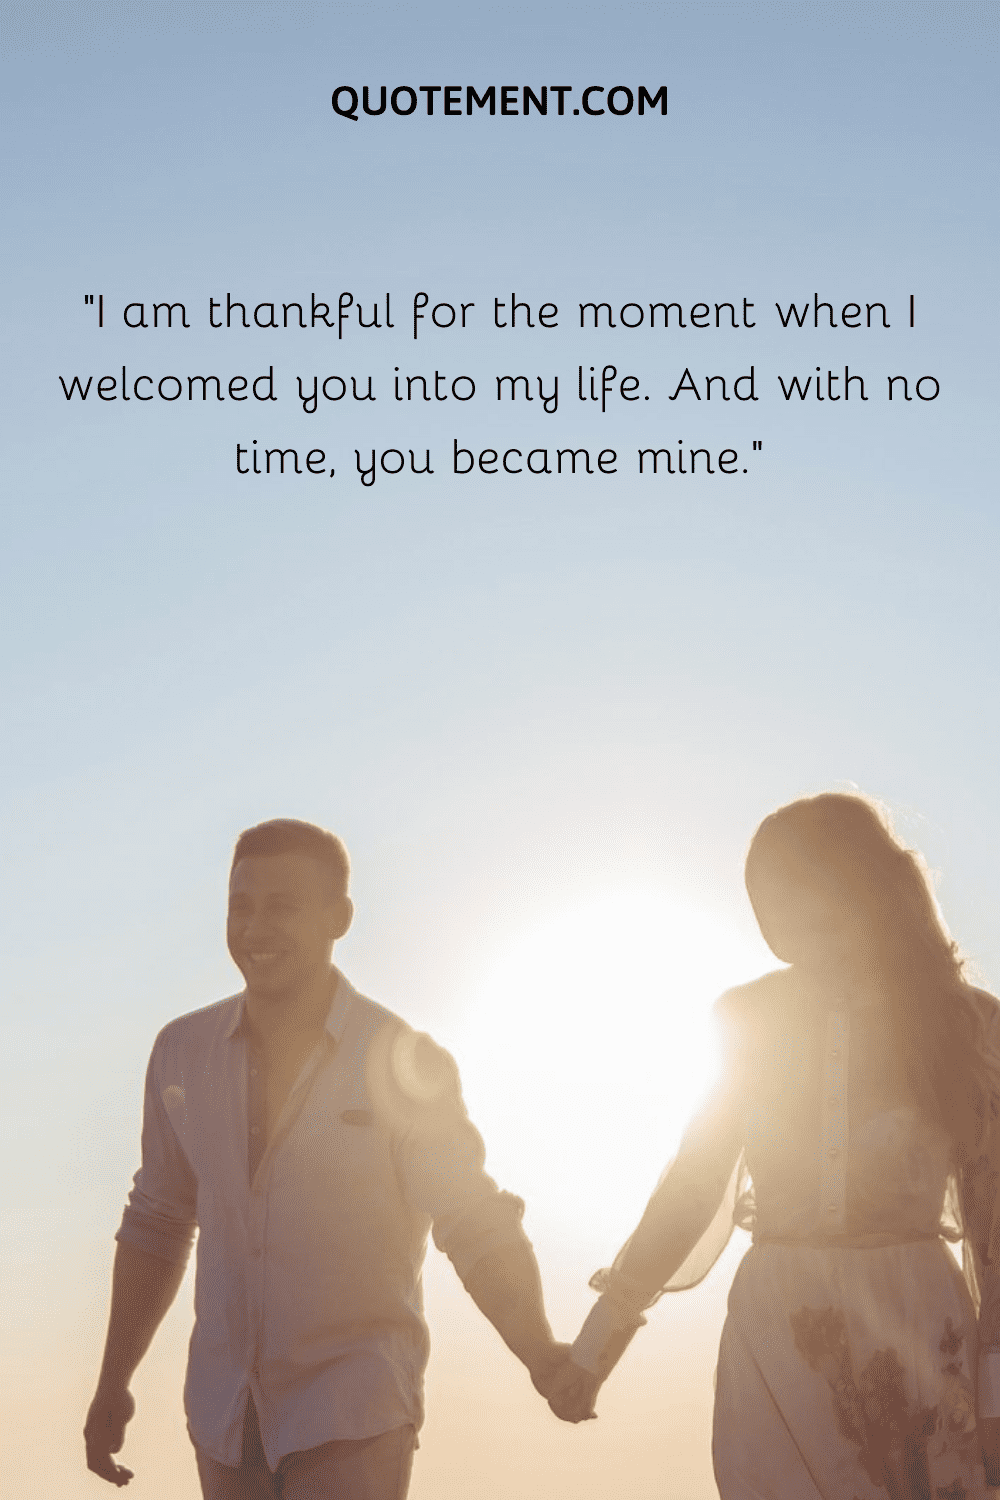 “I am thankful for the moment when I welcomed you into my life. And with no time, you became mine.”